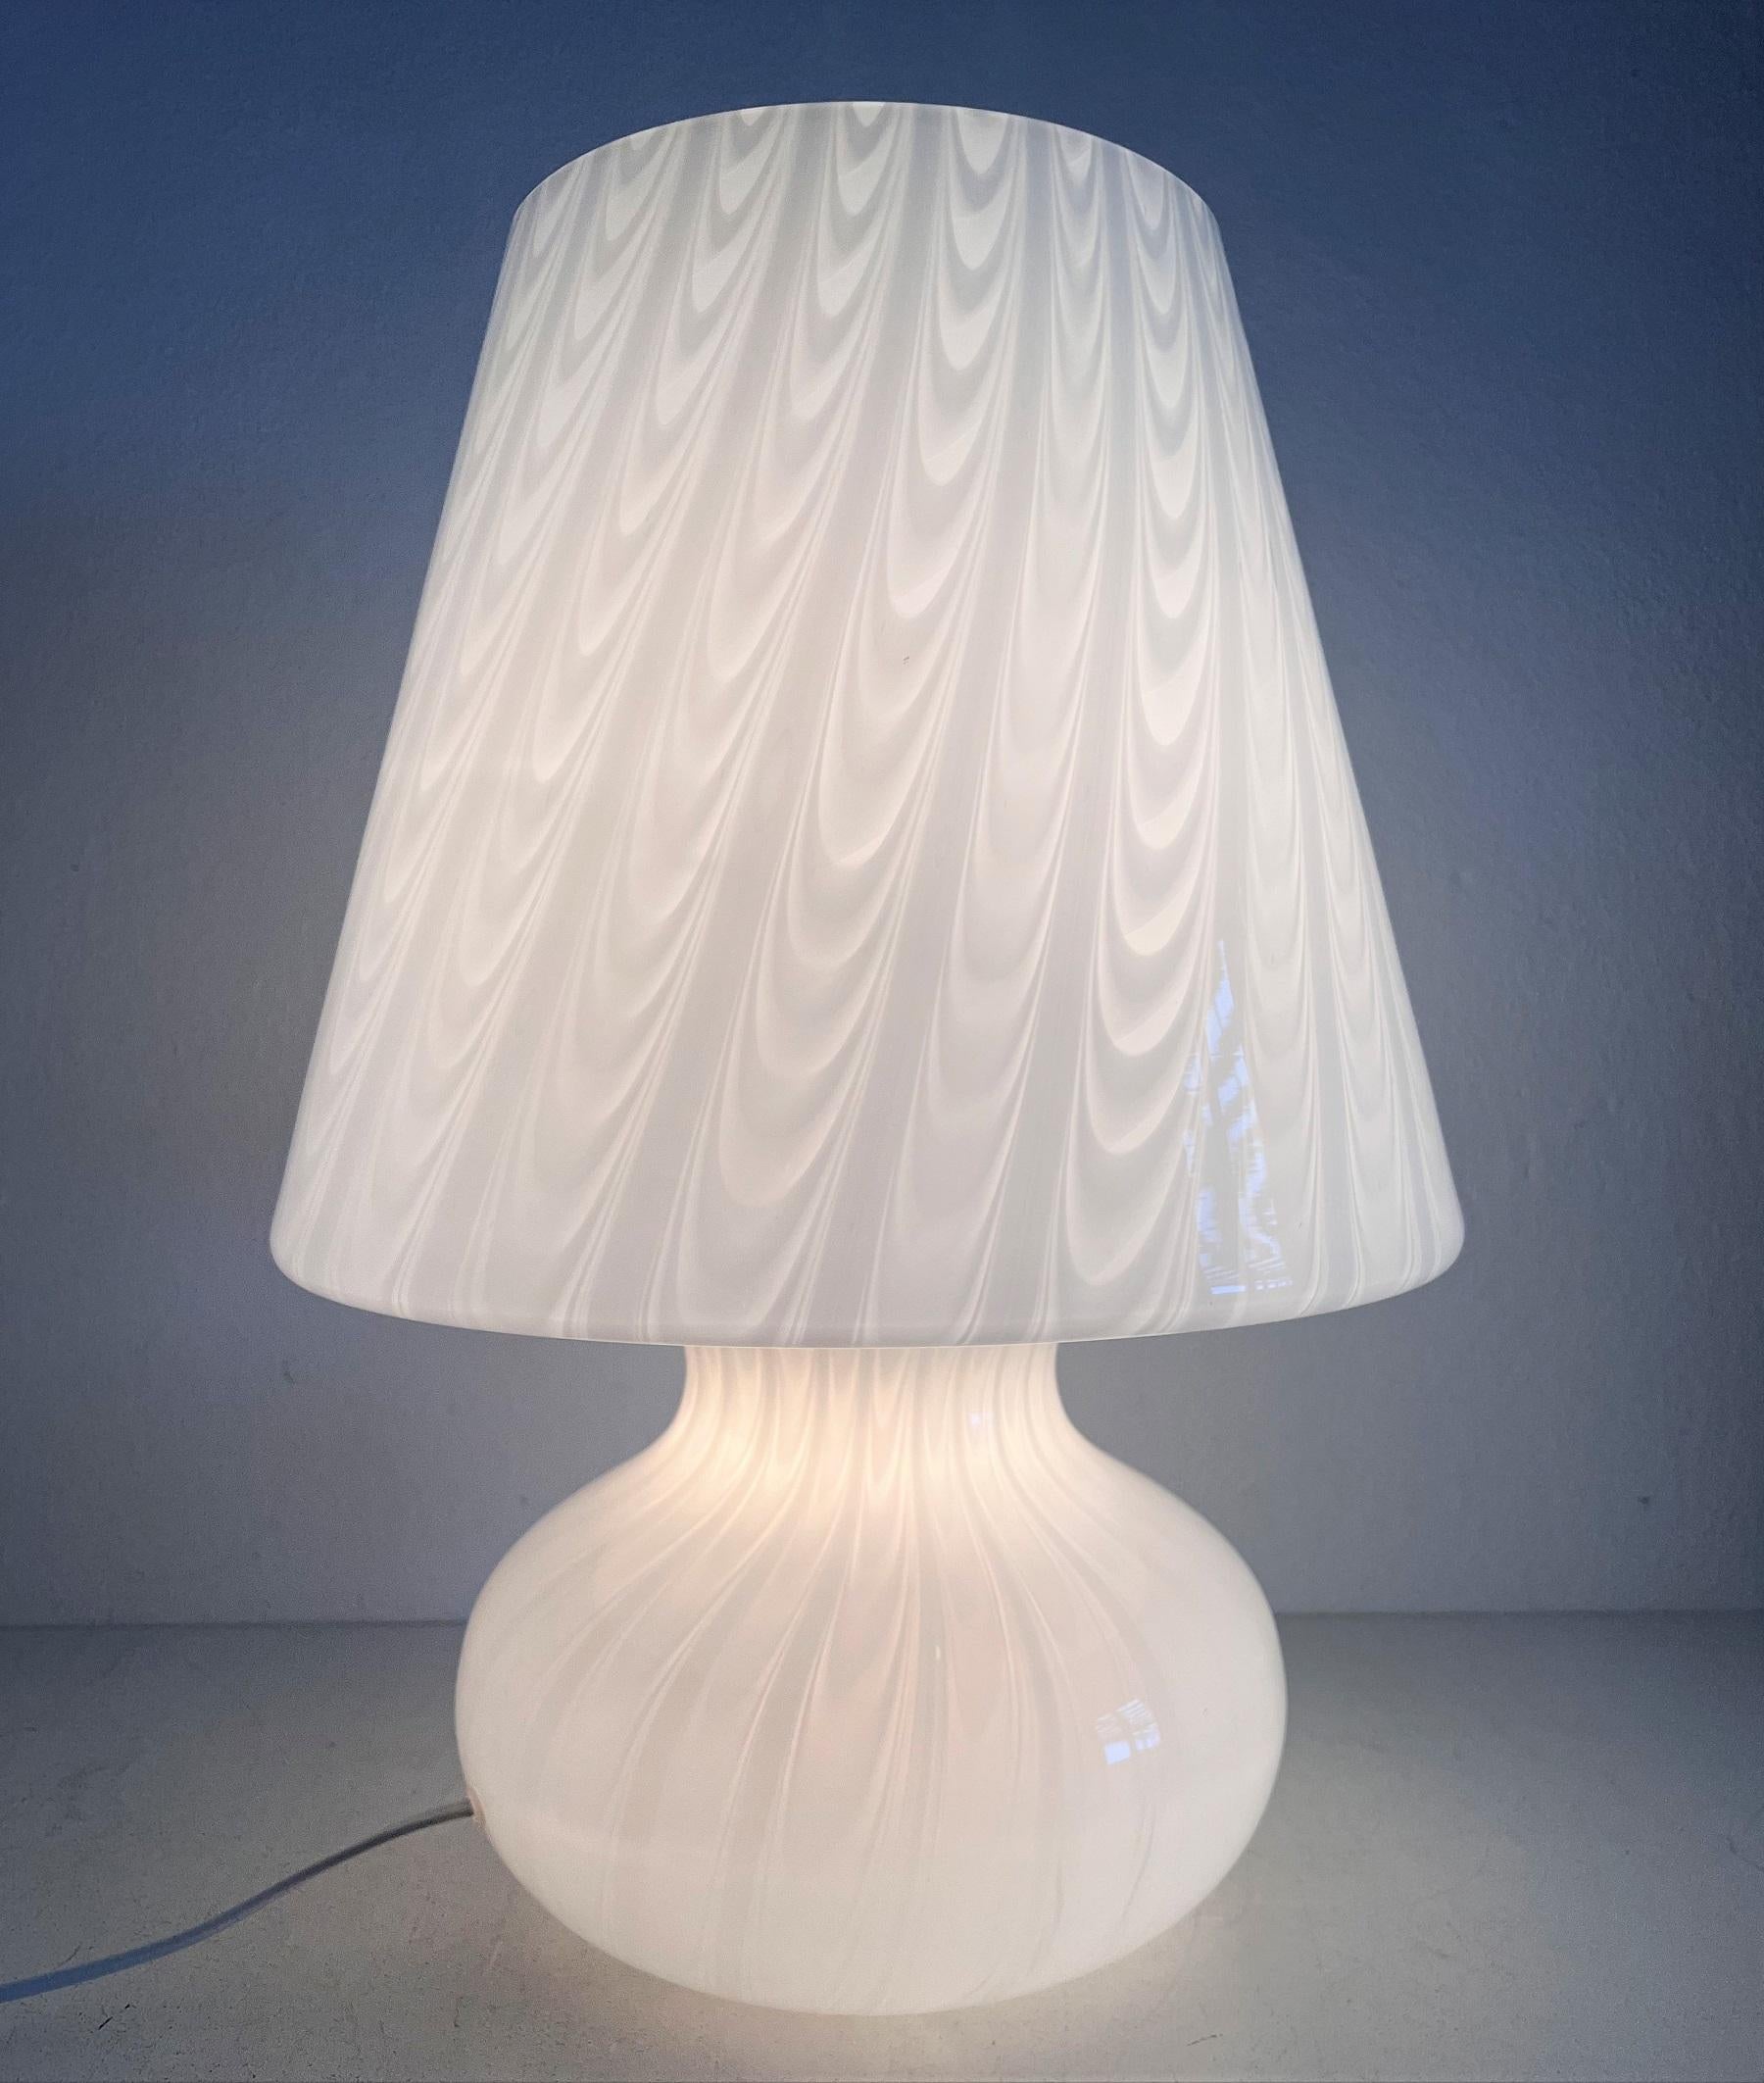 Hand-Crafted Italian Large Murano Glass Mushroom Table Lamp with Swirl Art Glass, 1970s For Sale